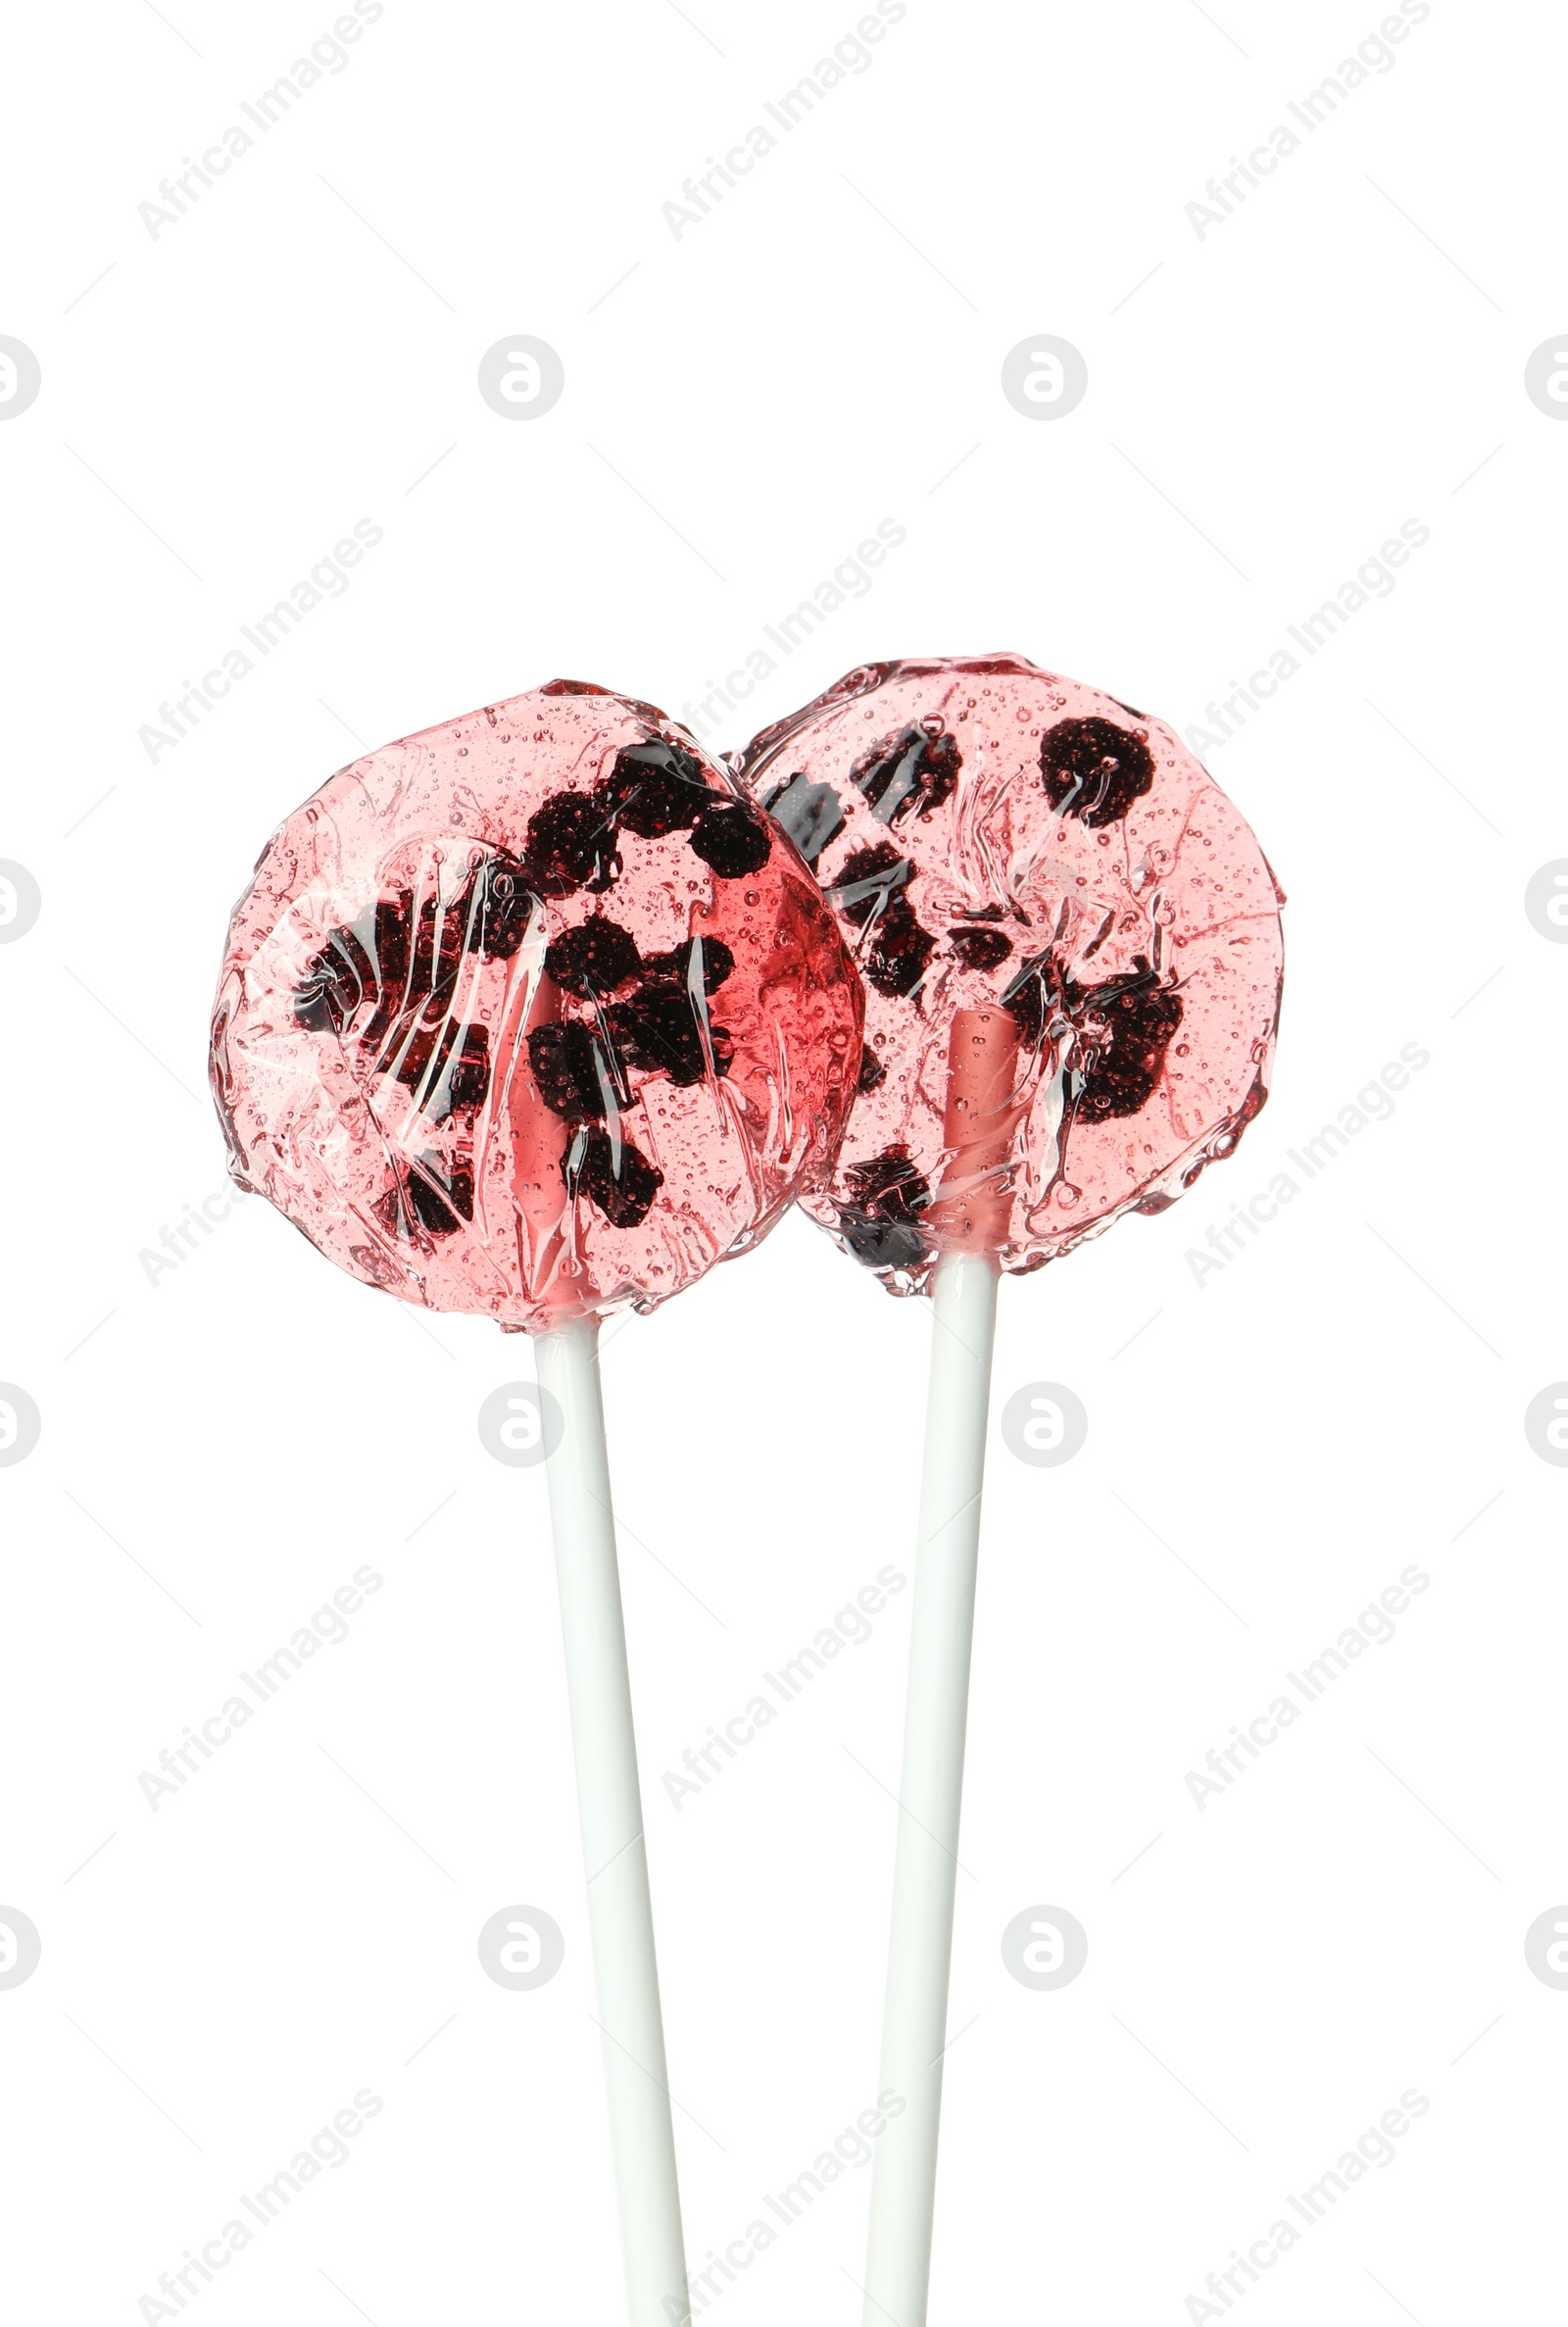 Photo of Sweet colorful lollipops with berries on white background